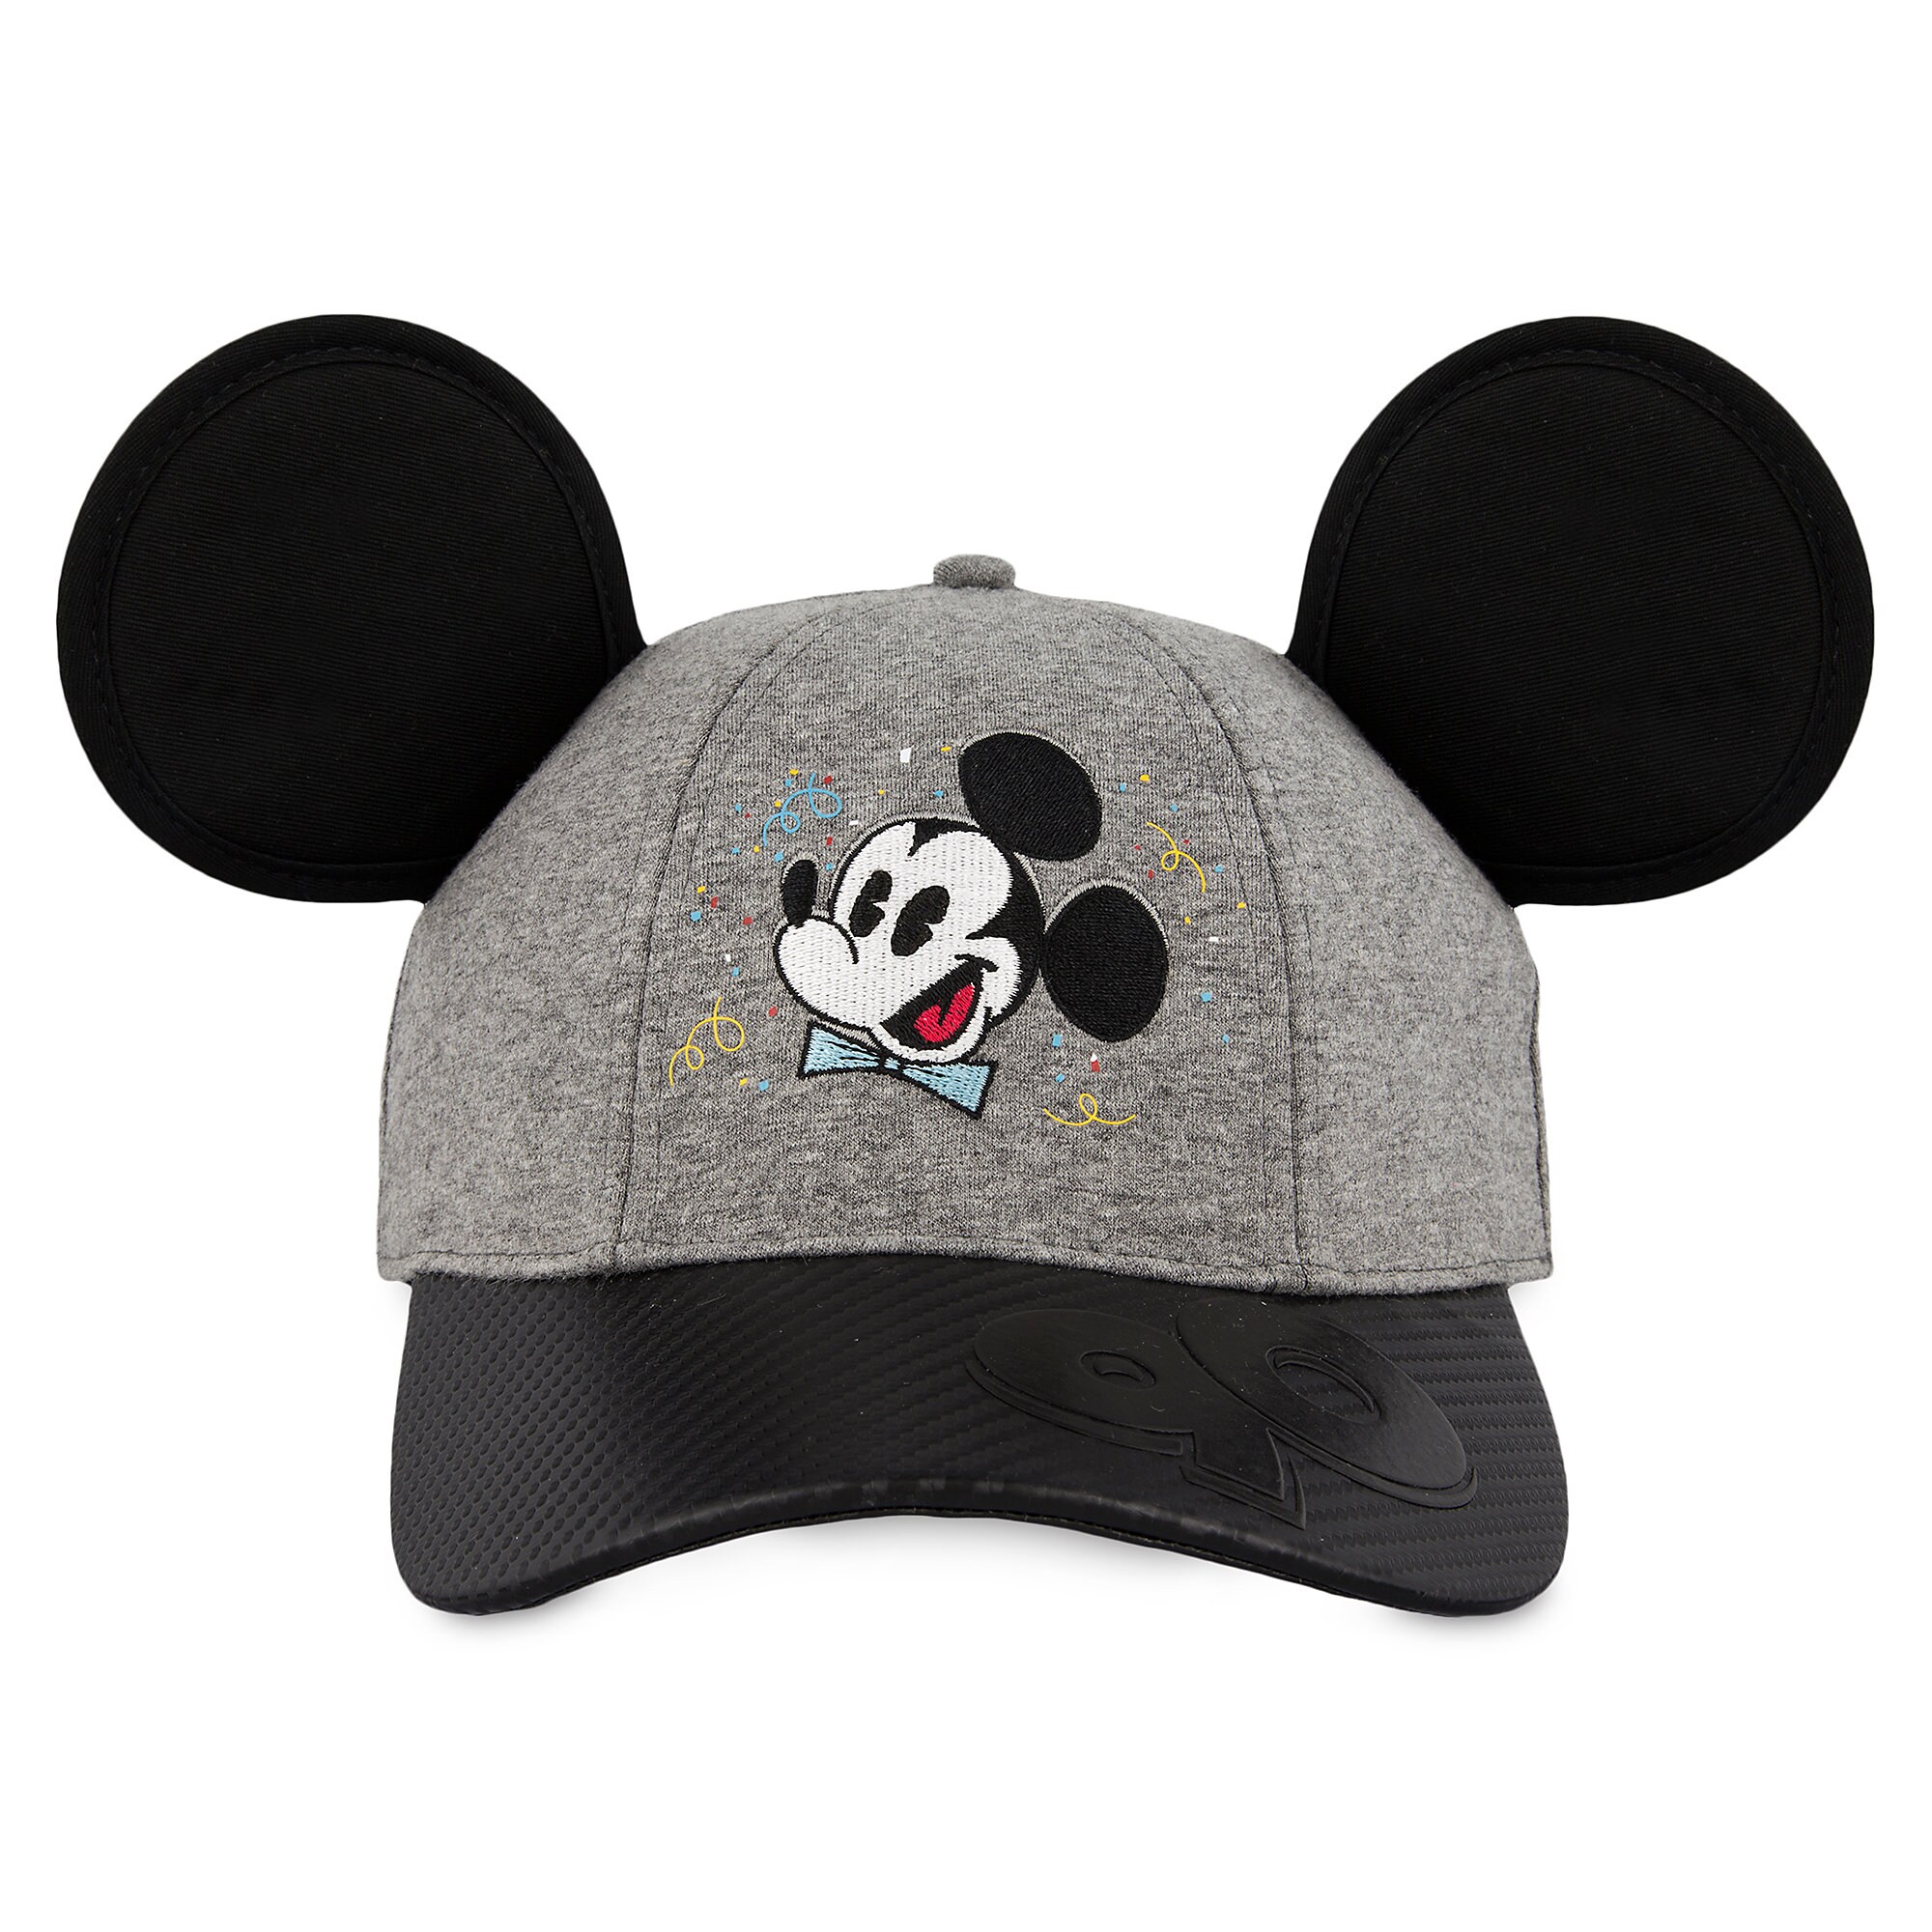 Mickey Mouse ''Celebration of the Mouse'' Baseball Cap for Adults